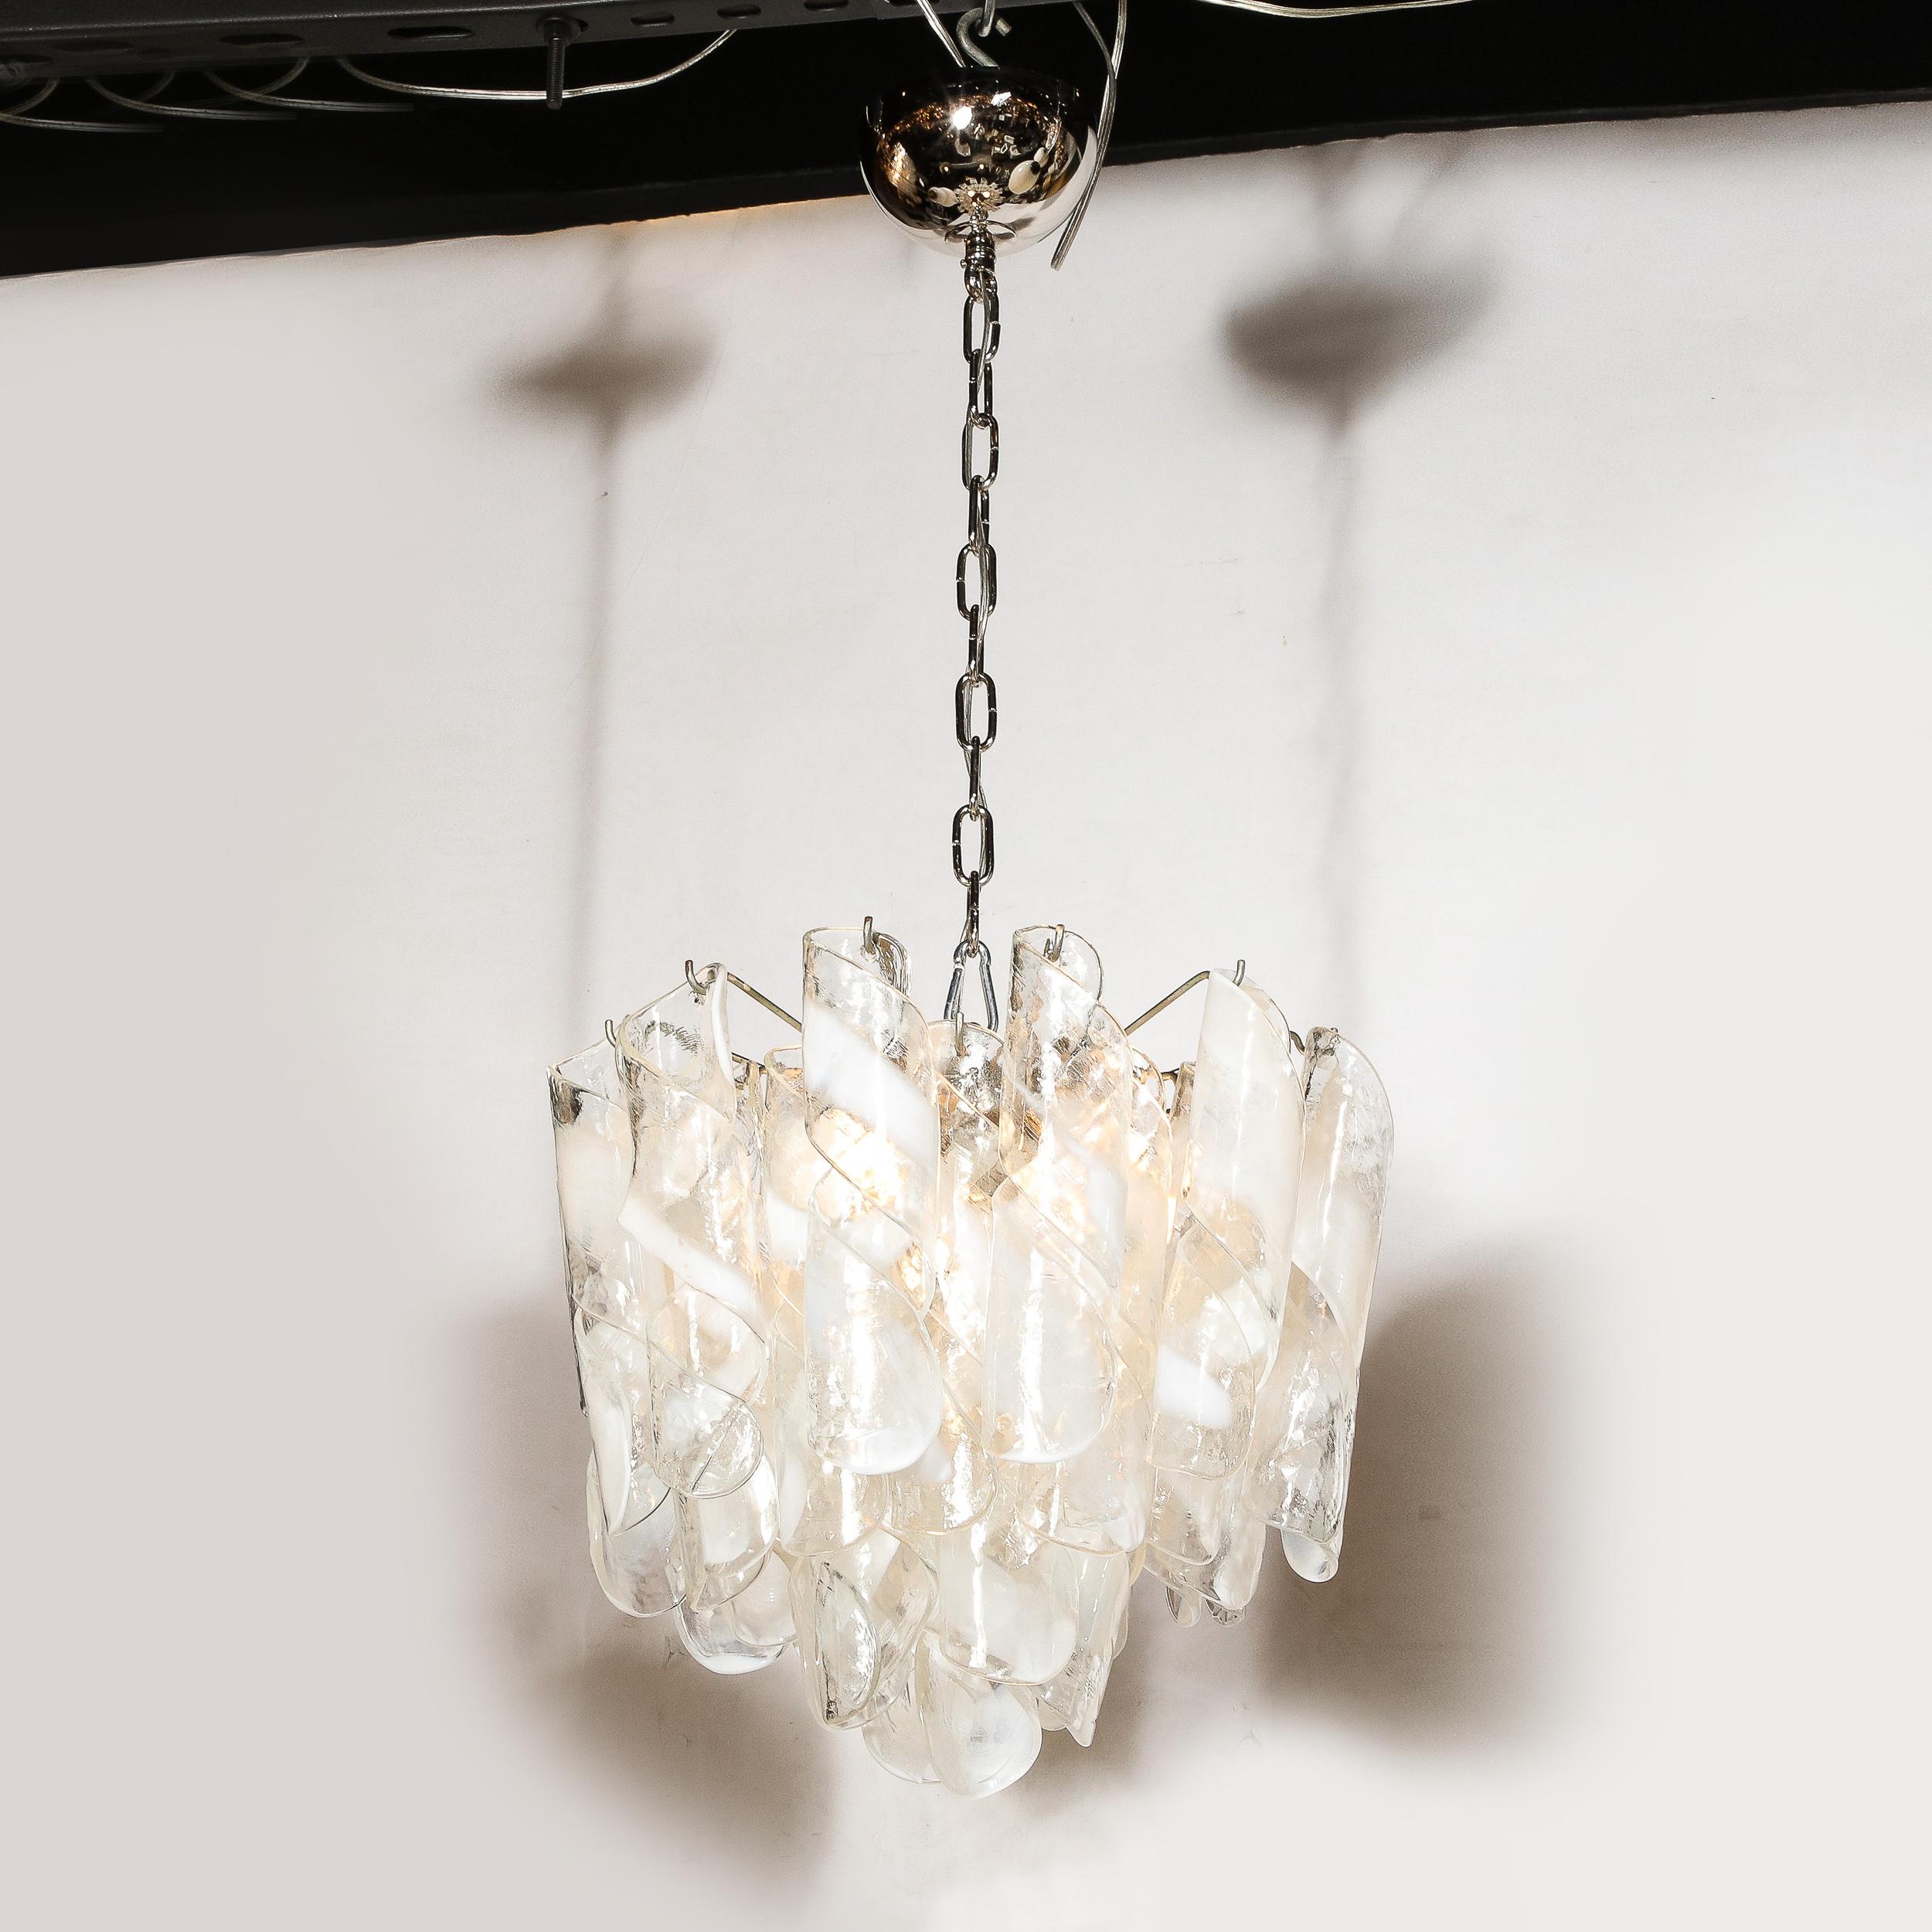 Mid-Century Modernist Hand-Blown Murano Glass Torciglioni Chandelier By Mazzega For Sale 6